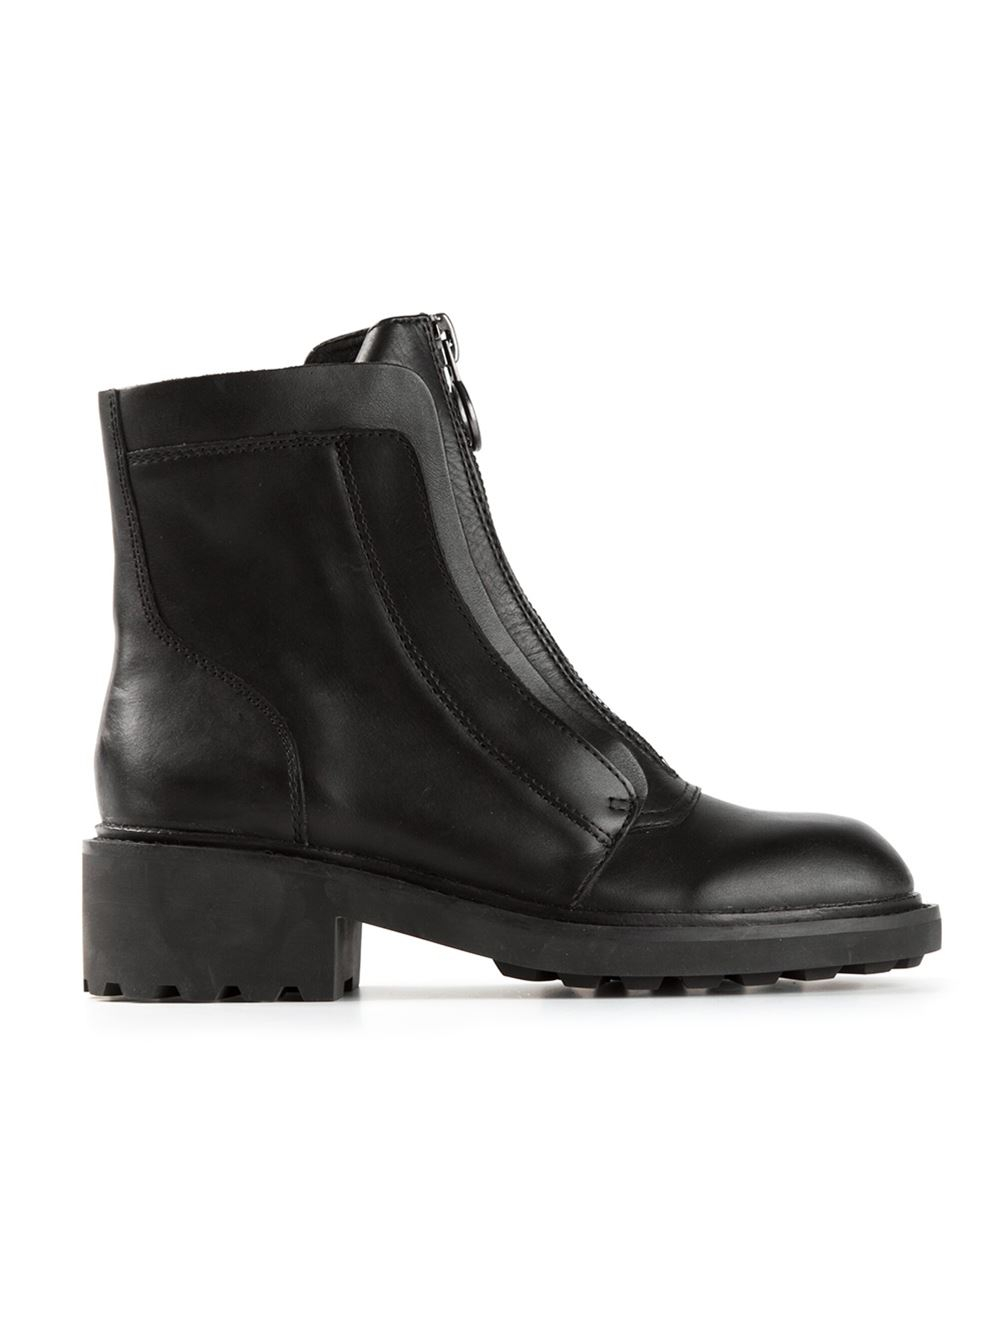 Ash Space Boots in Black | Lyst